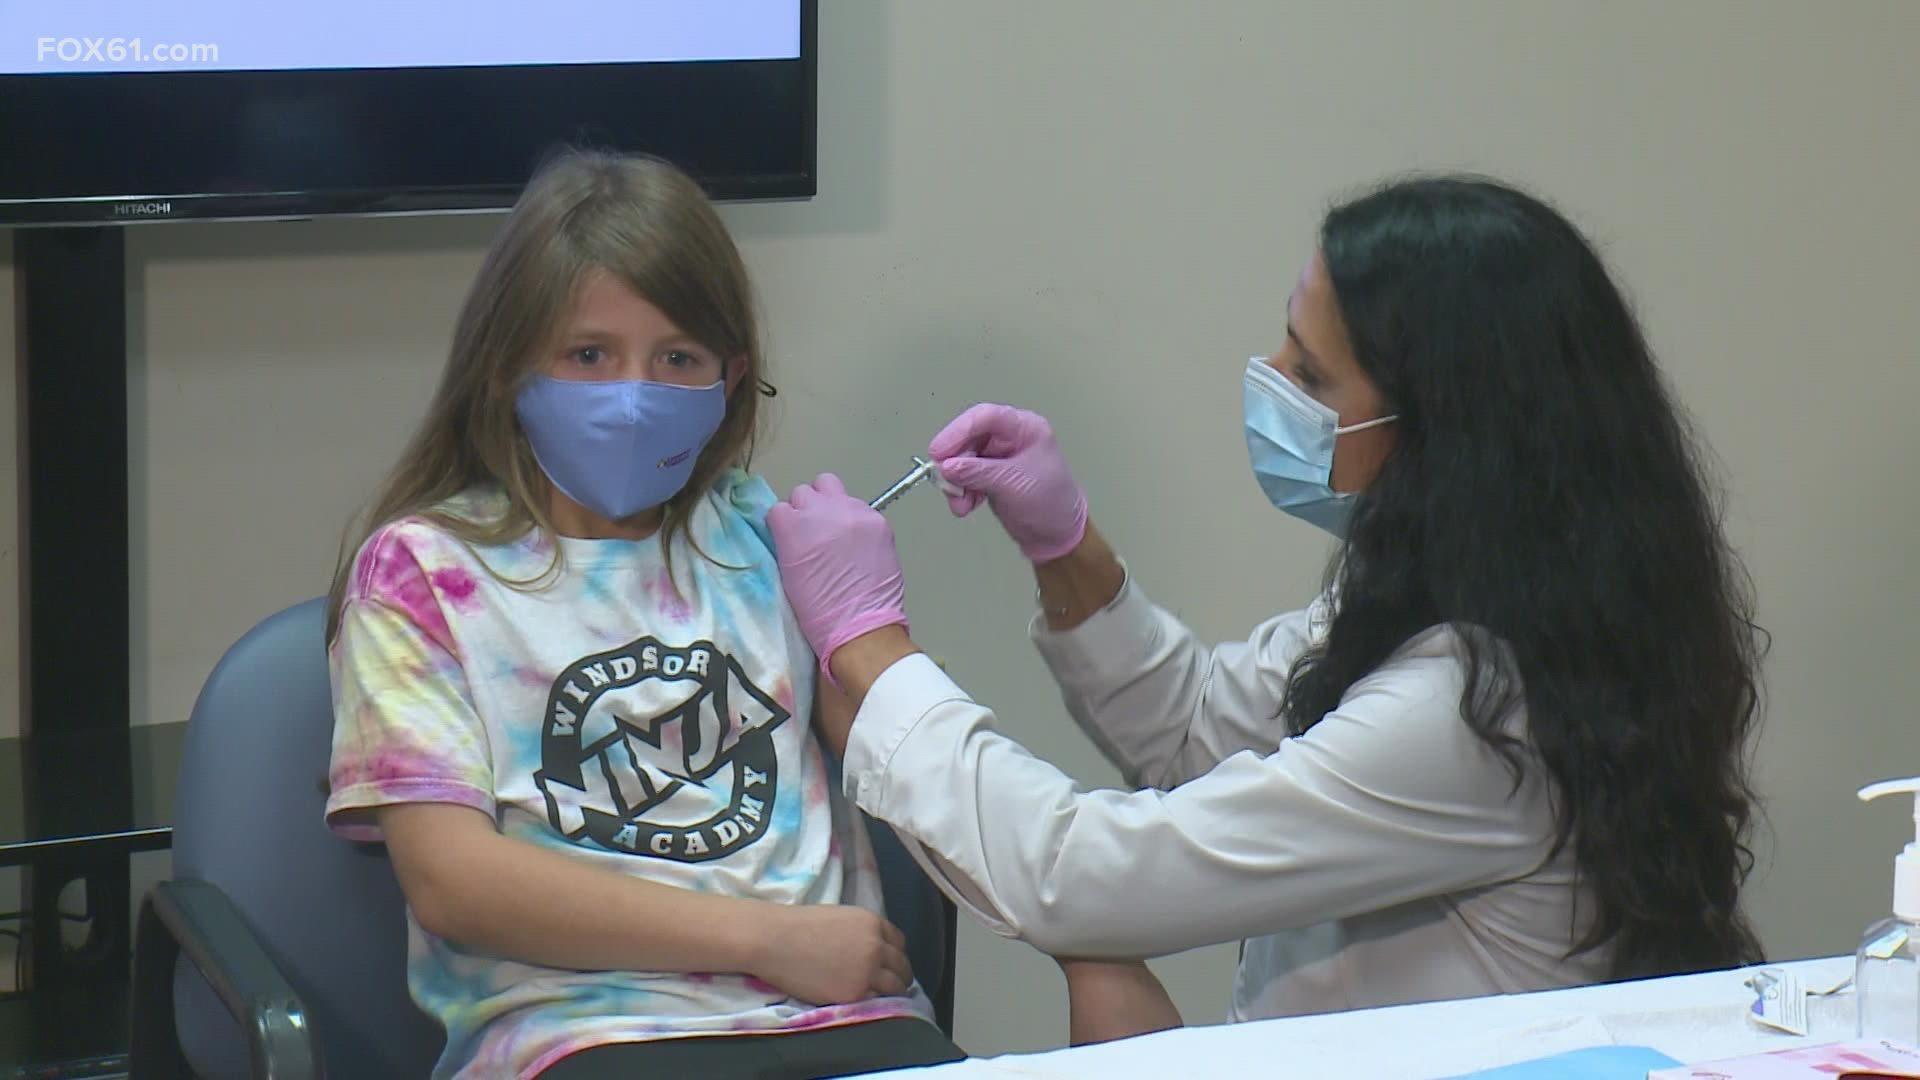 Health care systems across Connecticut have started administering the COVID vaccine for kids ages 5-11.